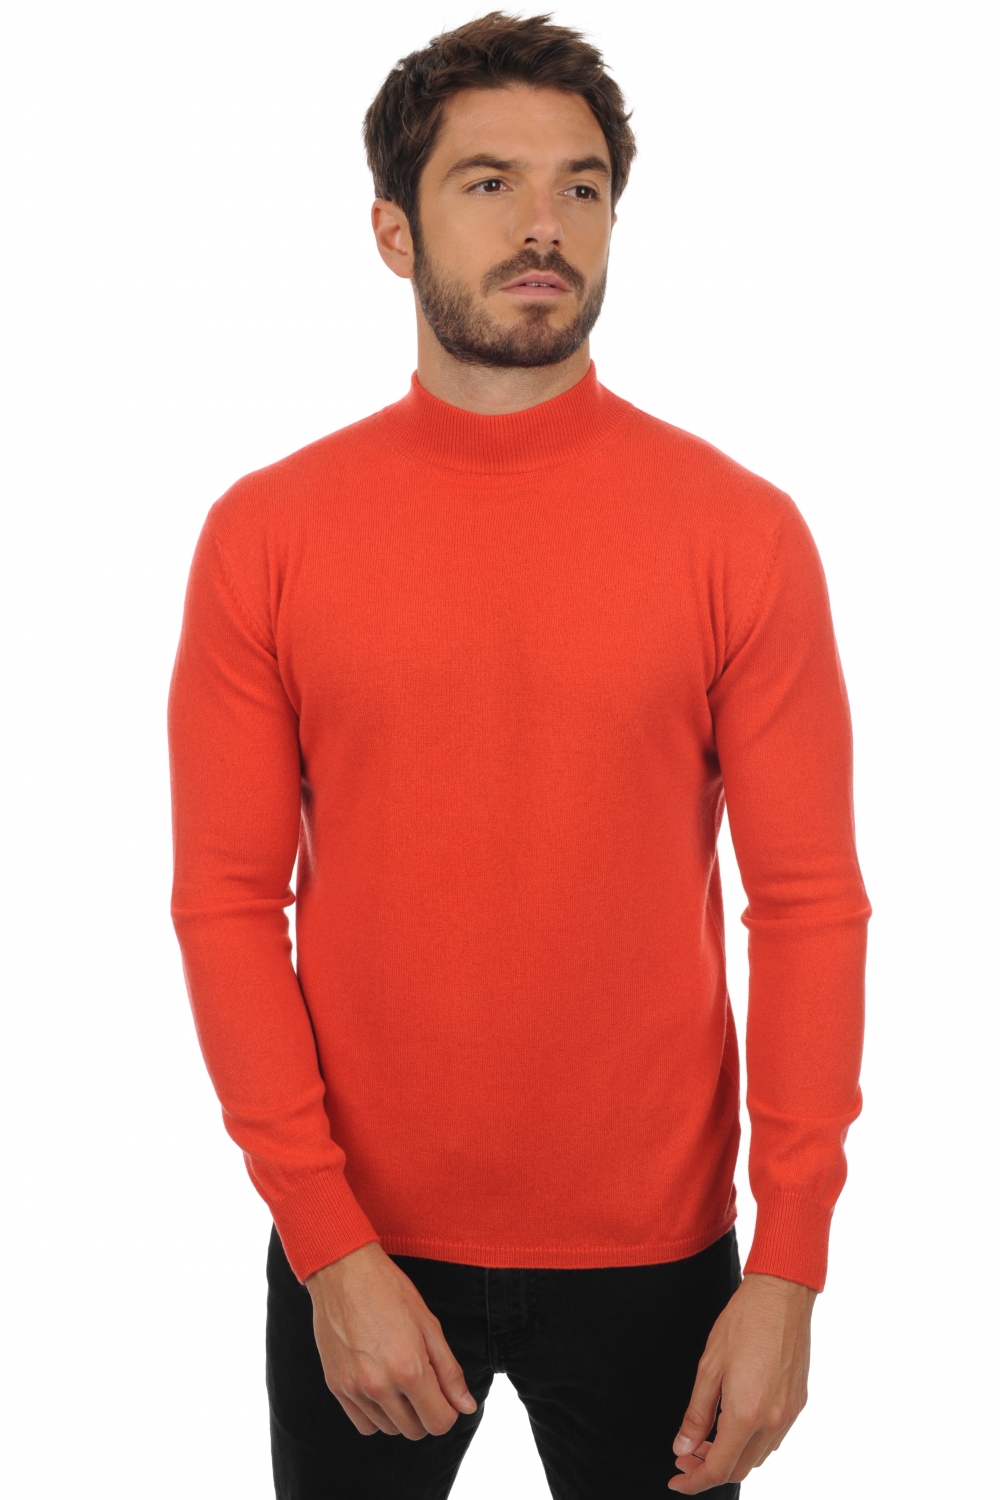 Cachemire pull homme frederic corail lumineux m